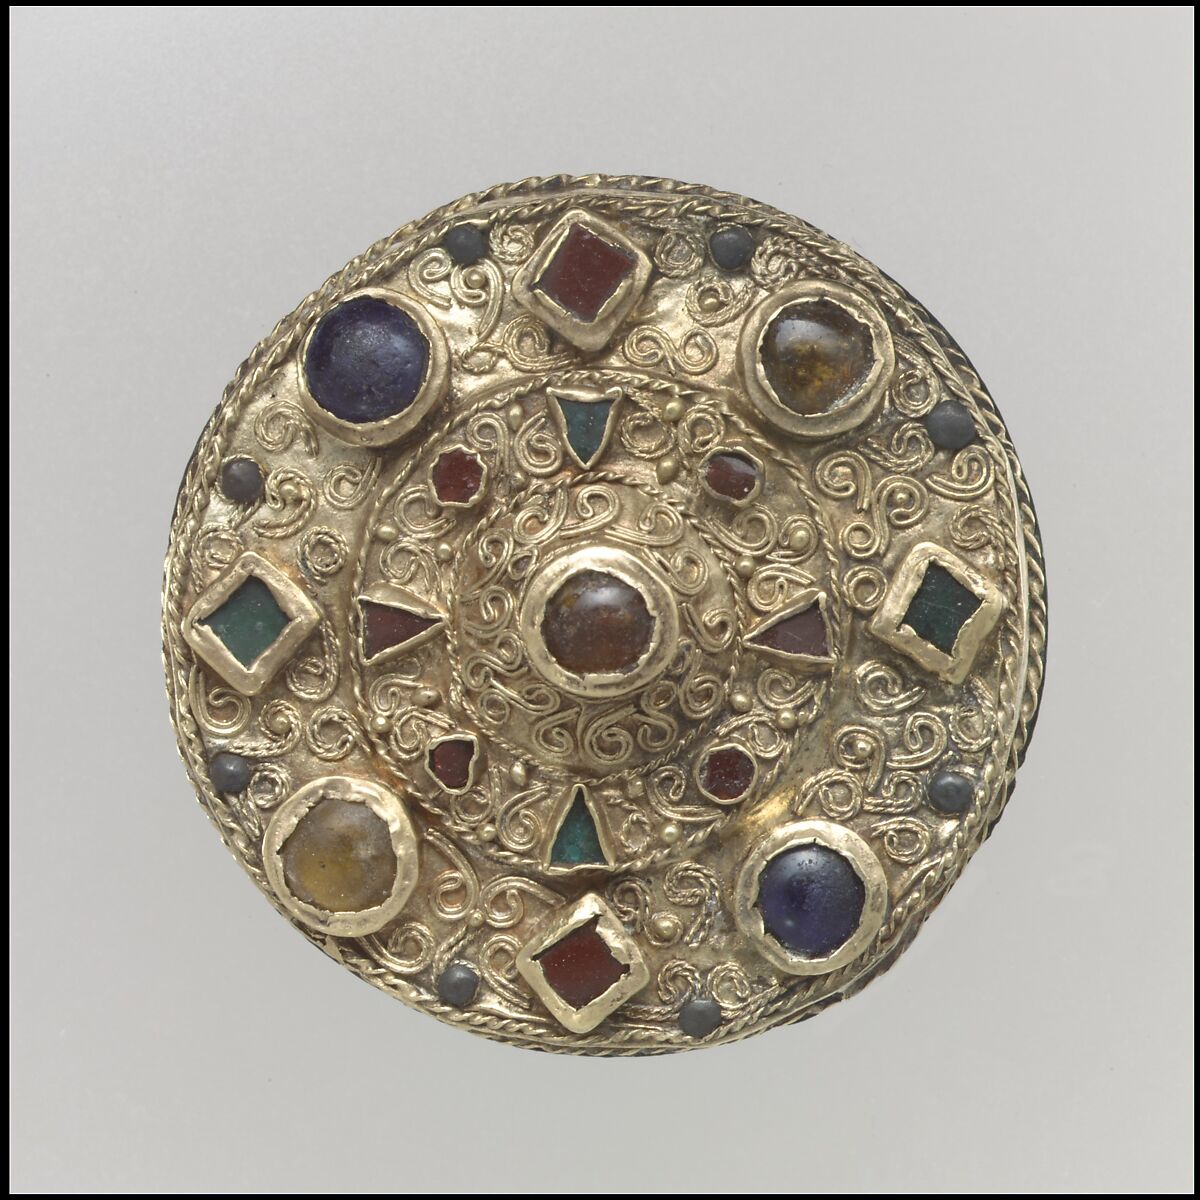 Disk Brooch, Gold sheet with filigree and glass inlays, Frankish 